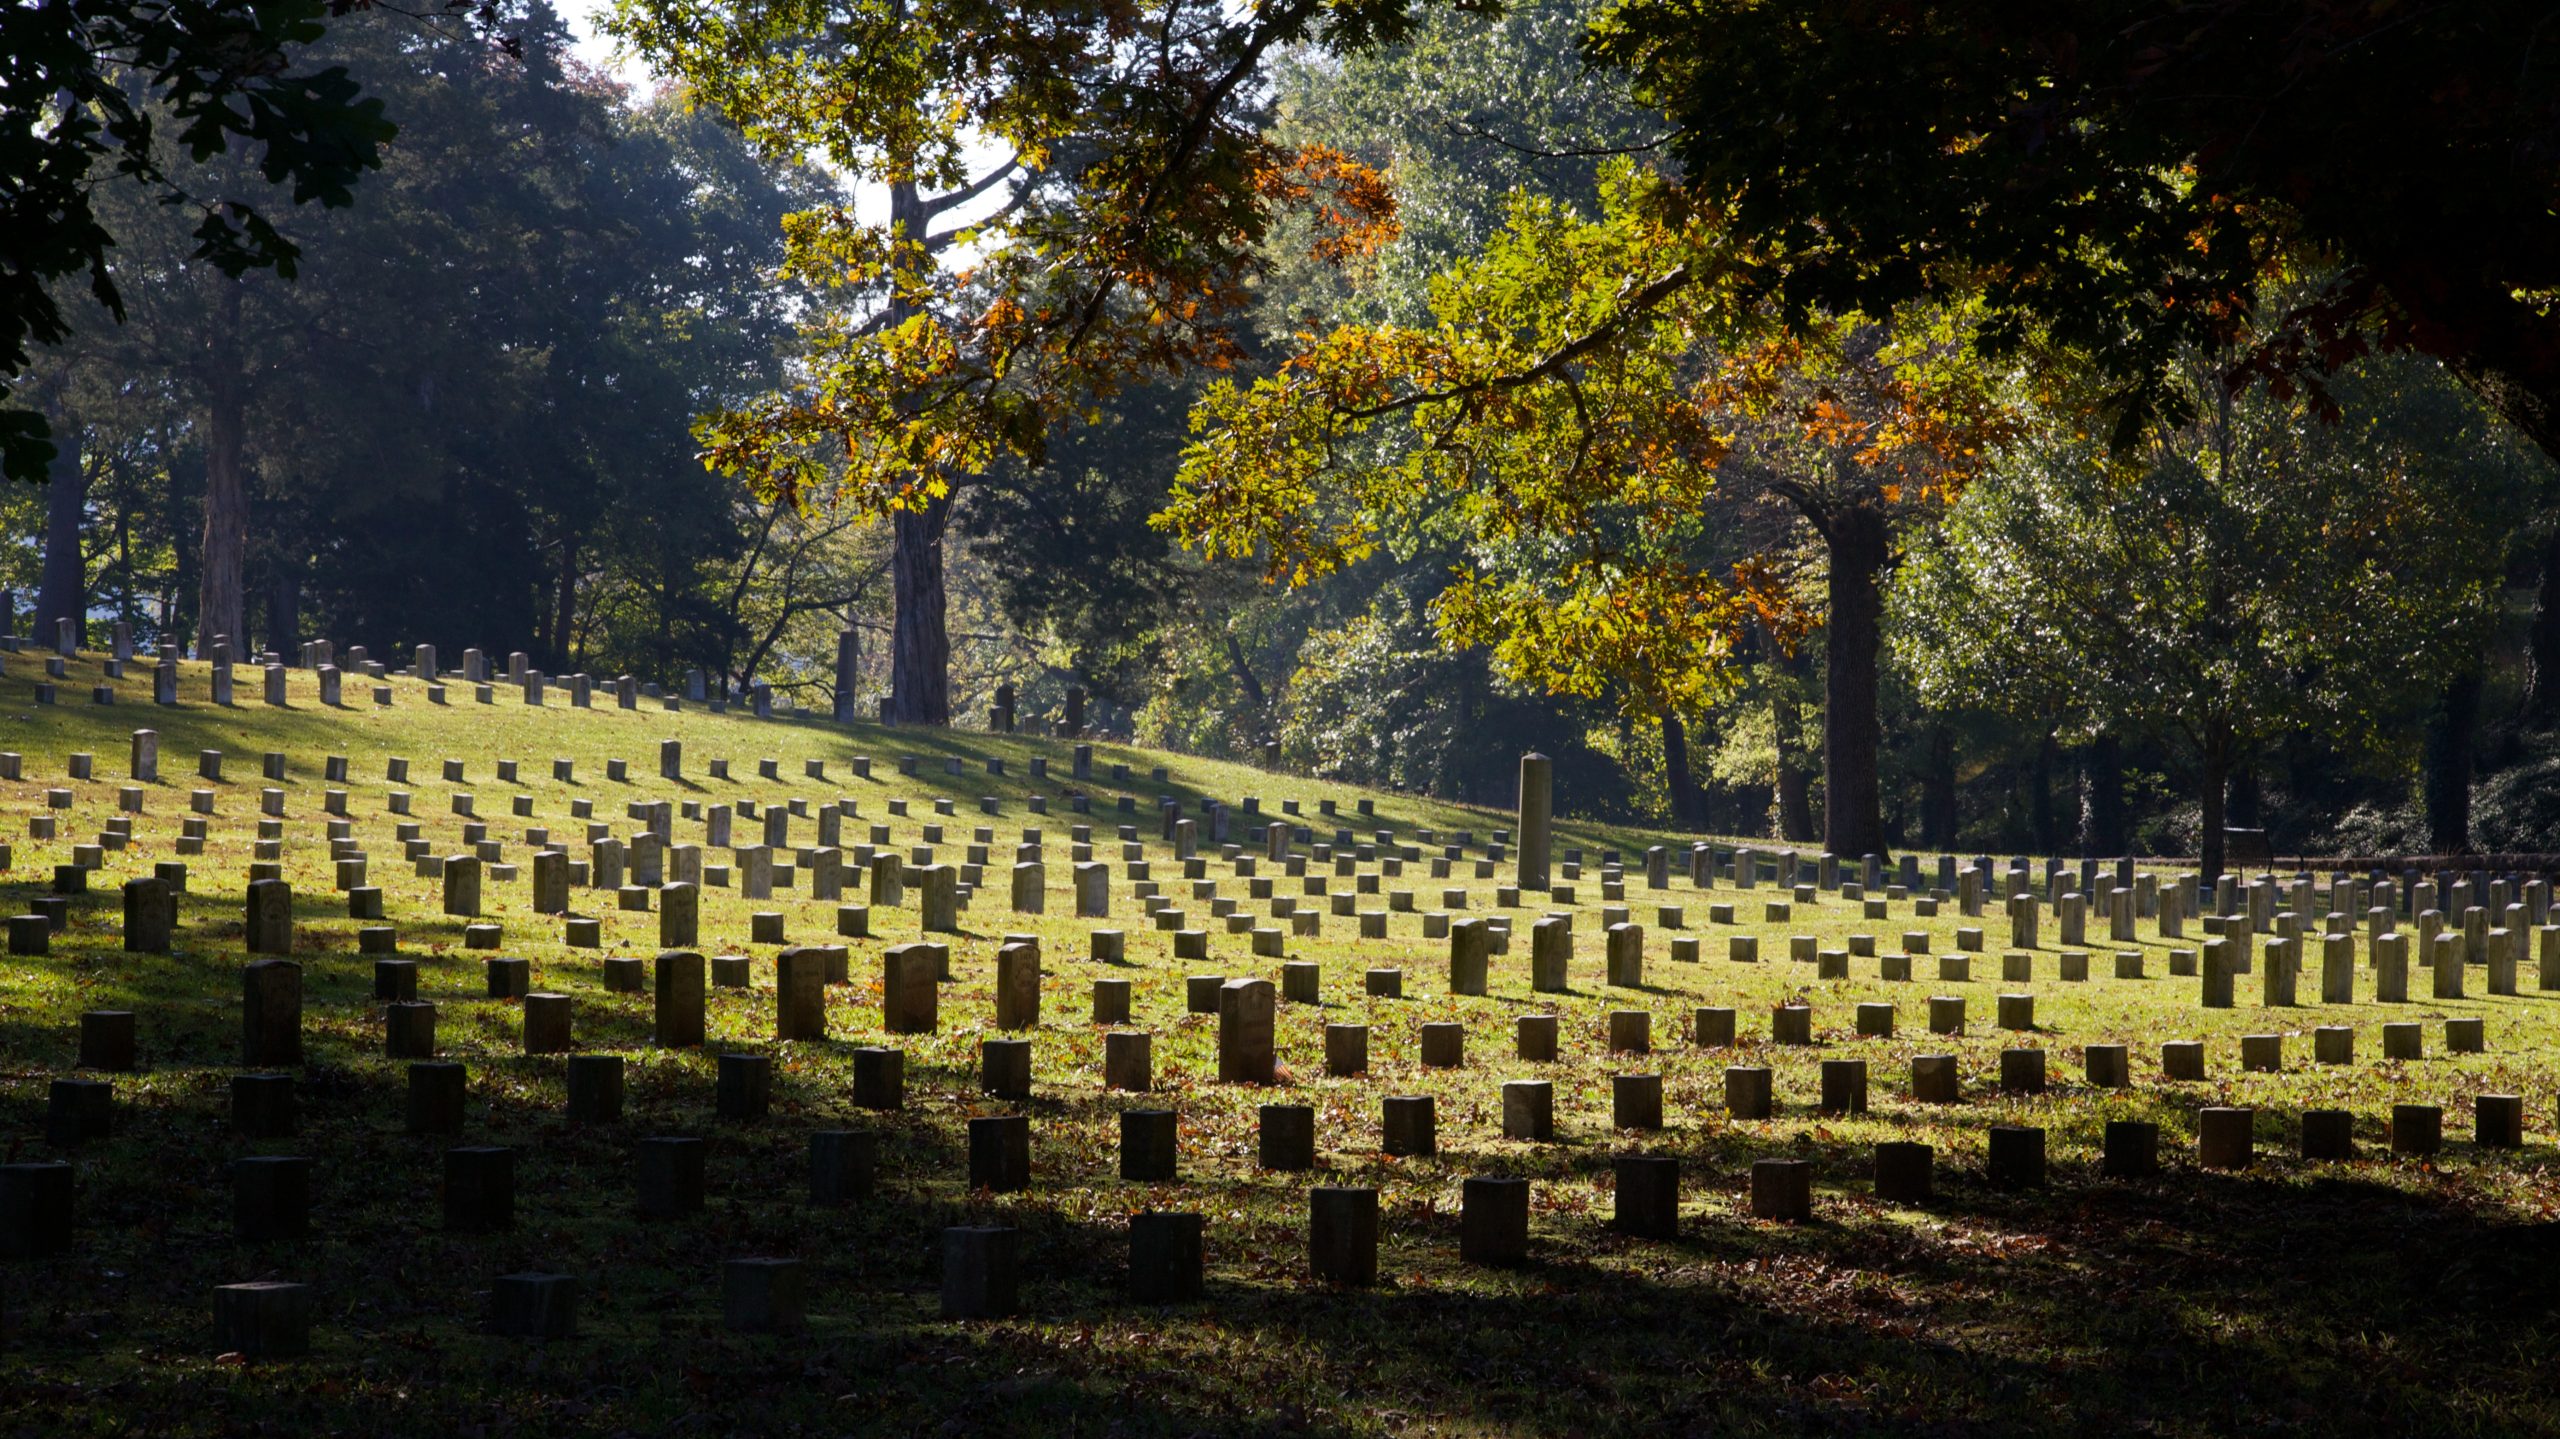 An image of Shiloh National Cemetery with rows of small headstones marking the graves of unknown soldiers, reminiscent of the words of Lincoln at Gettysburg.